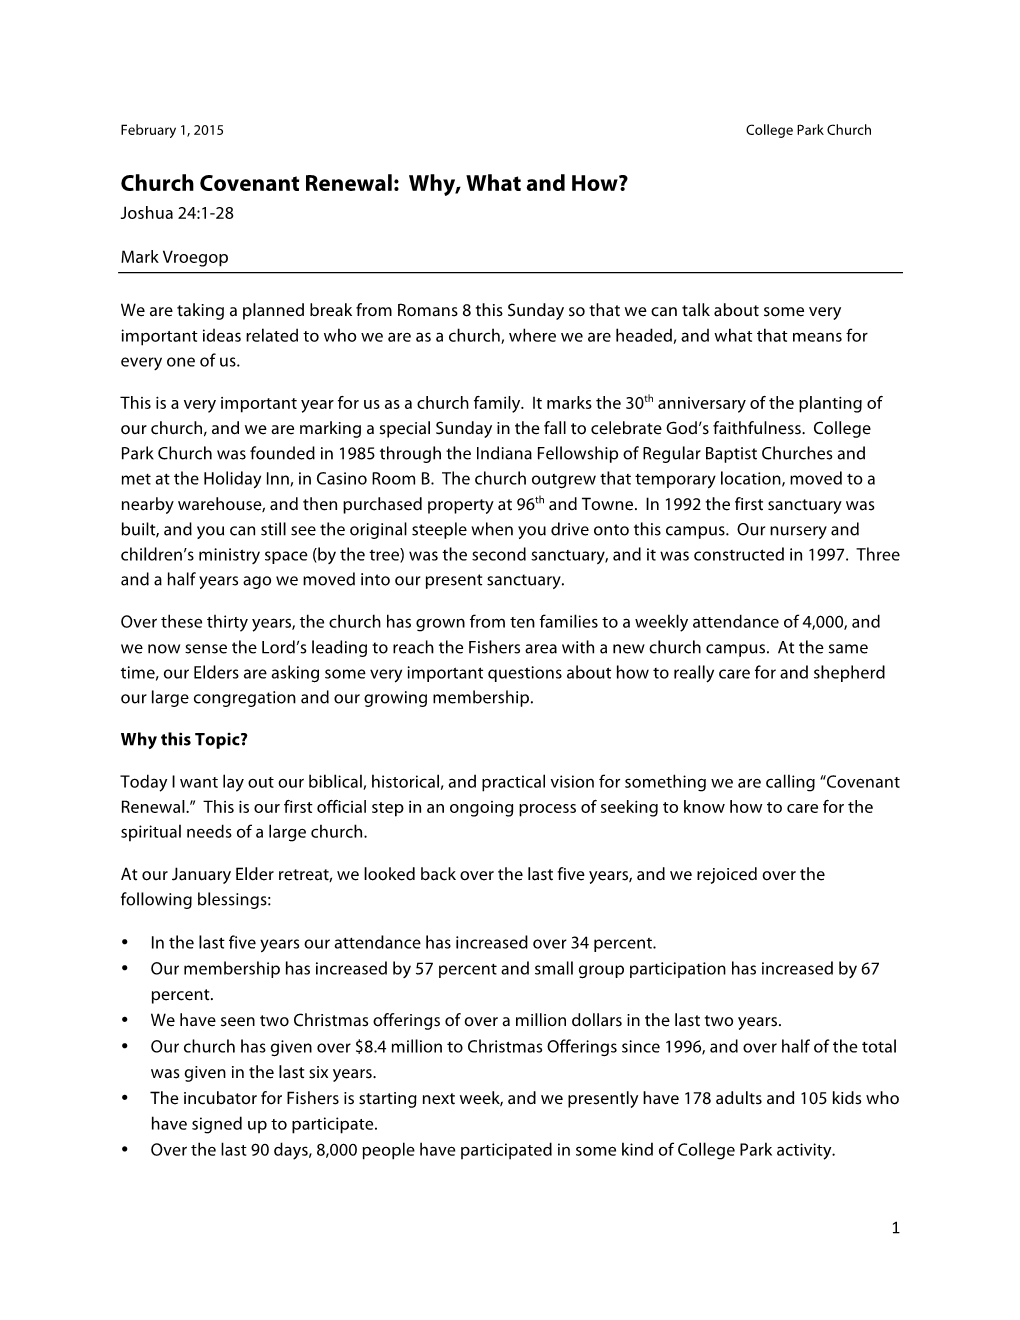 Church Covenant Renewal: Why, What and How? Joshua 24:1-28